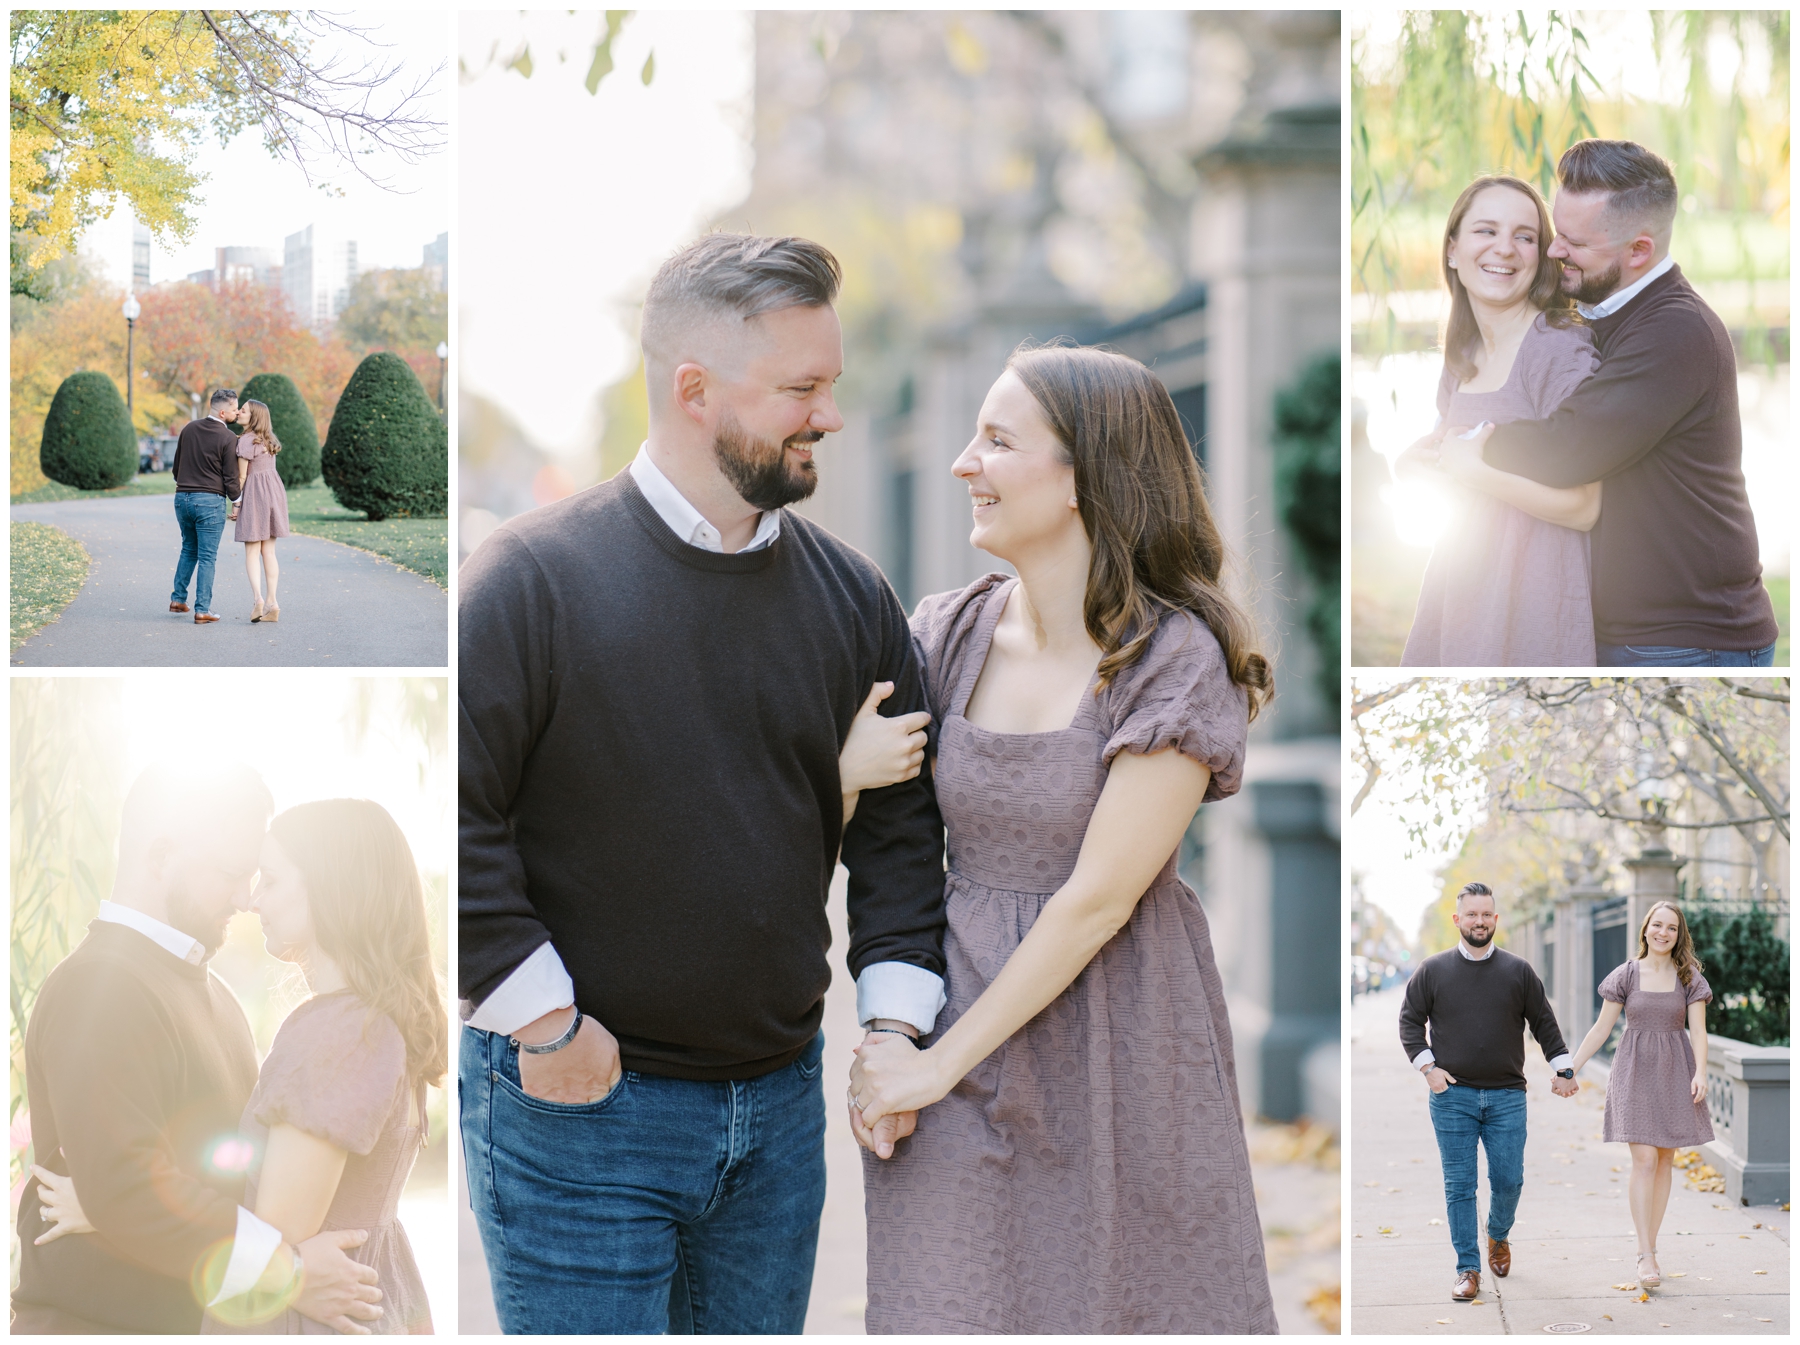 Boston Engagement Session by light and airy Boston photographer Stephanie Berenson